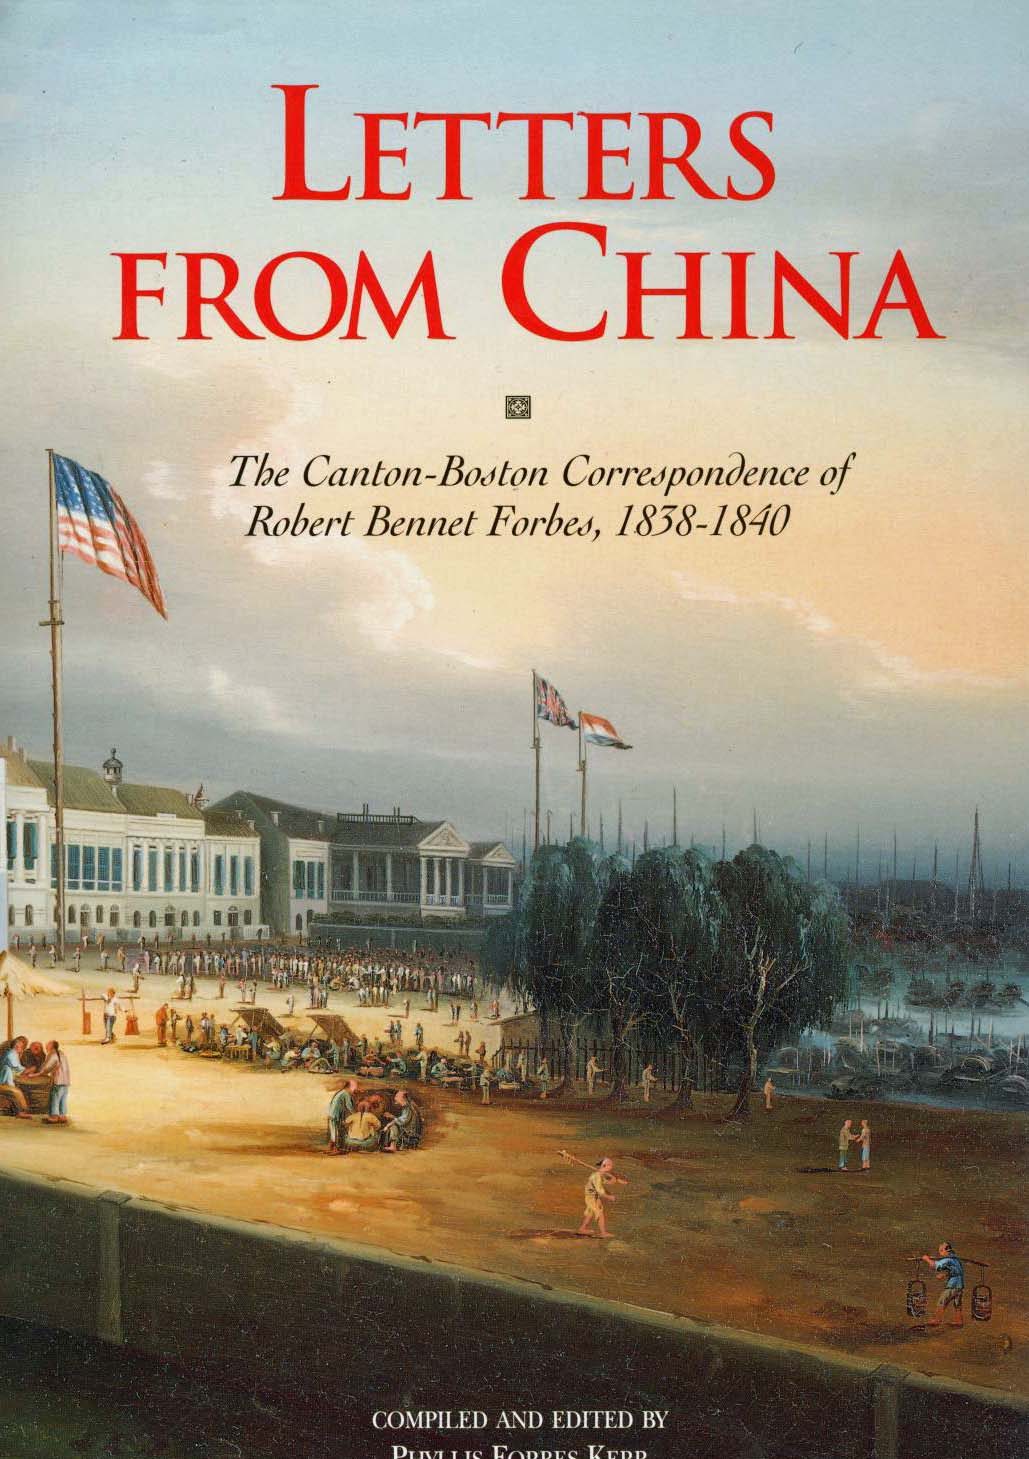 Forbes Kerr, Phyllis - Letters from China - The Canton-Boston Correspondance of Robert Bennet Forbes, 1838-1840